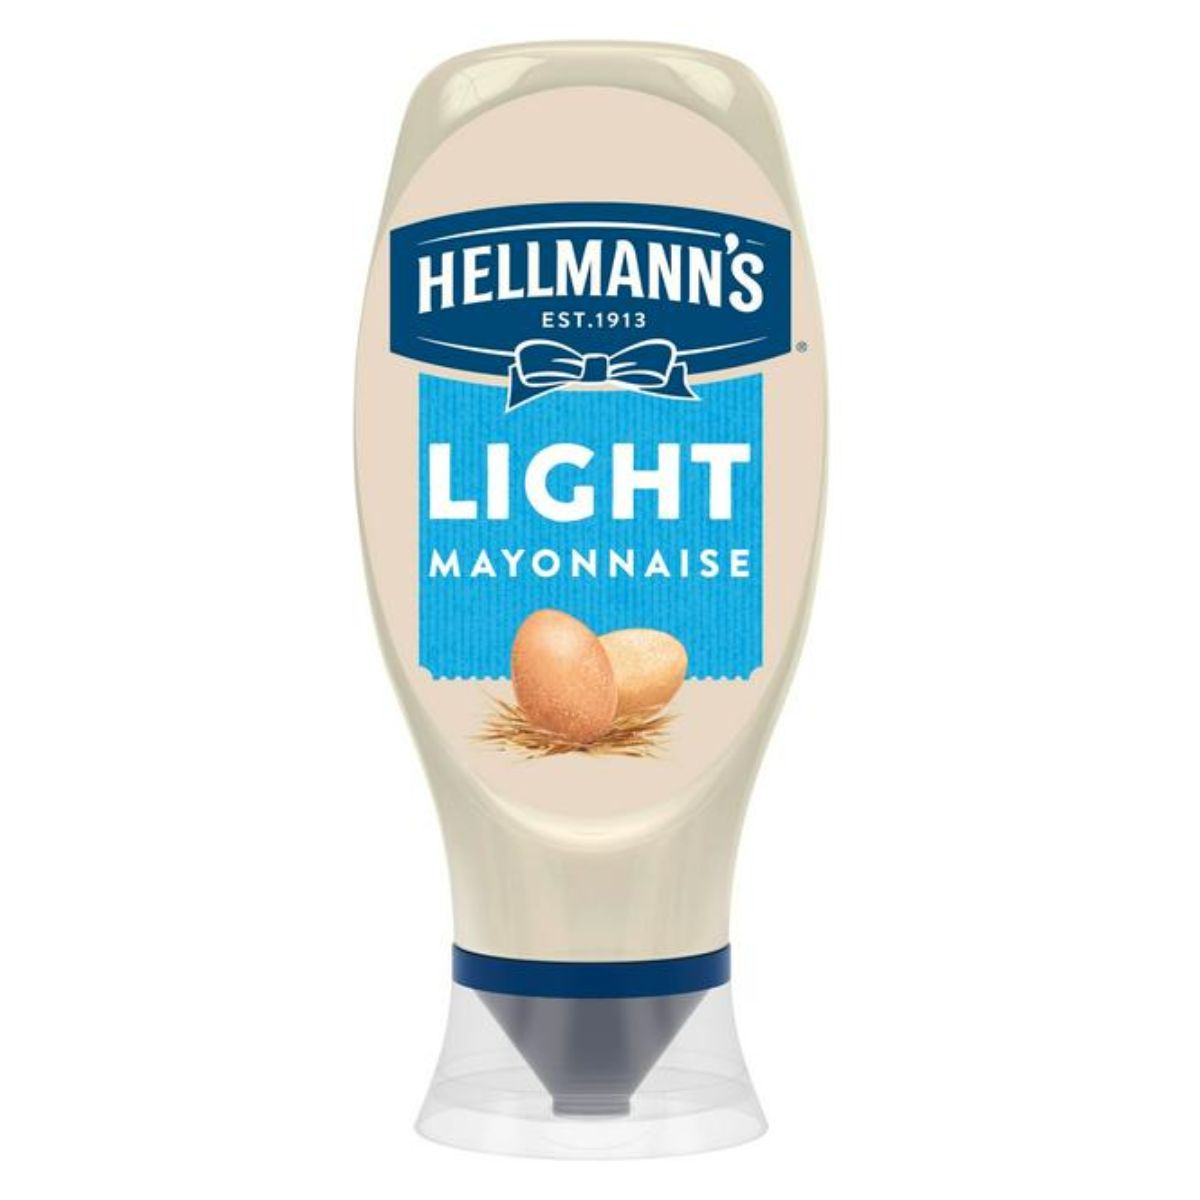 A bottle of Hellmanns - Squeezy Light Mayonnaise - 430ml.